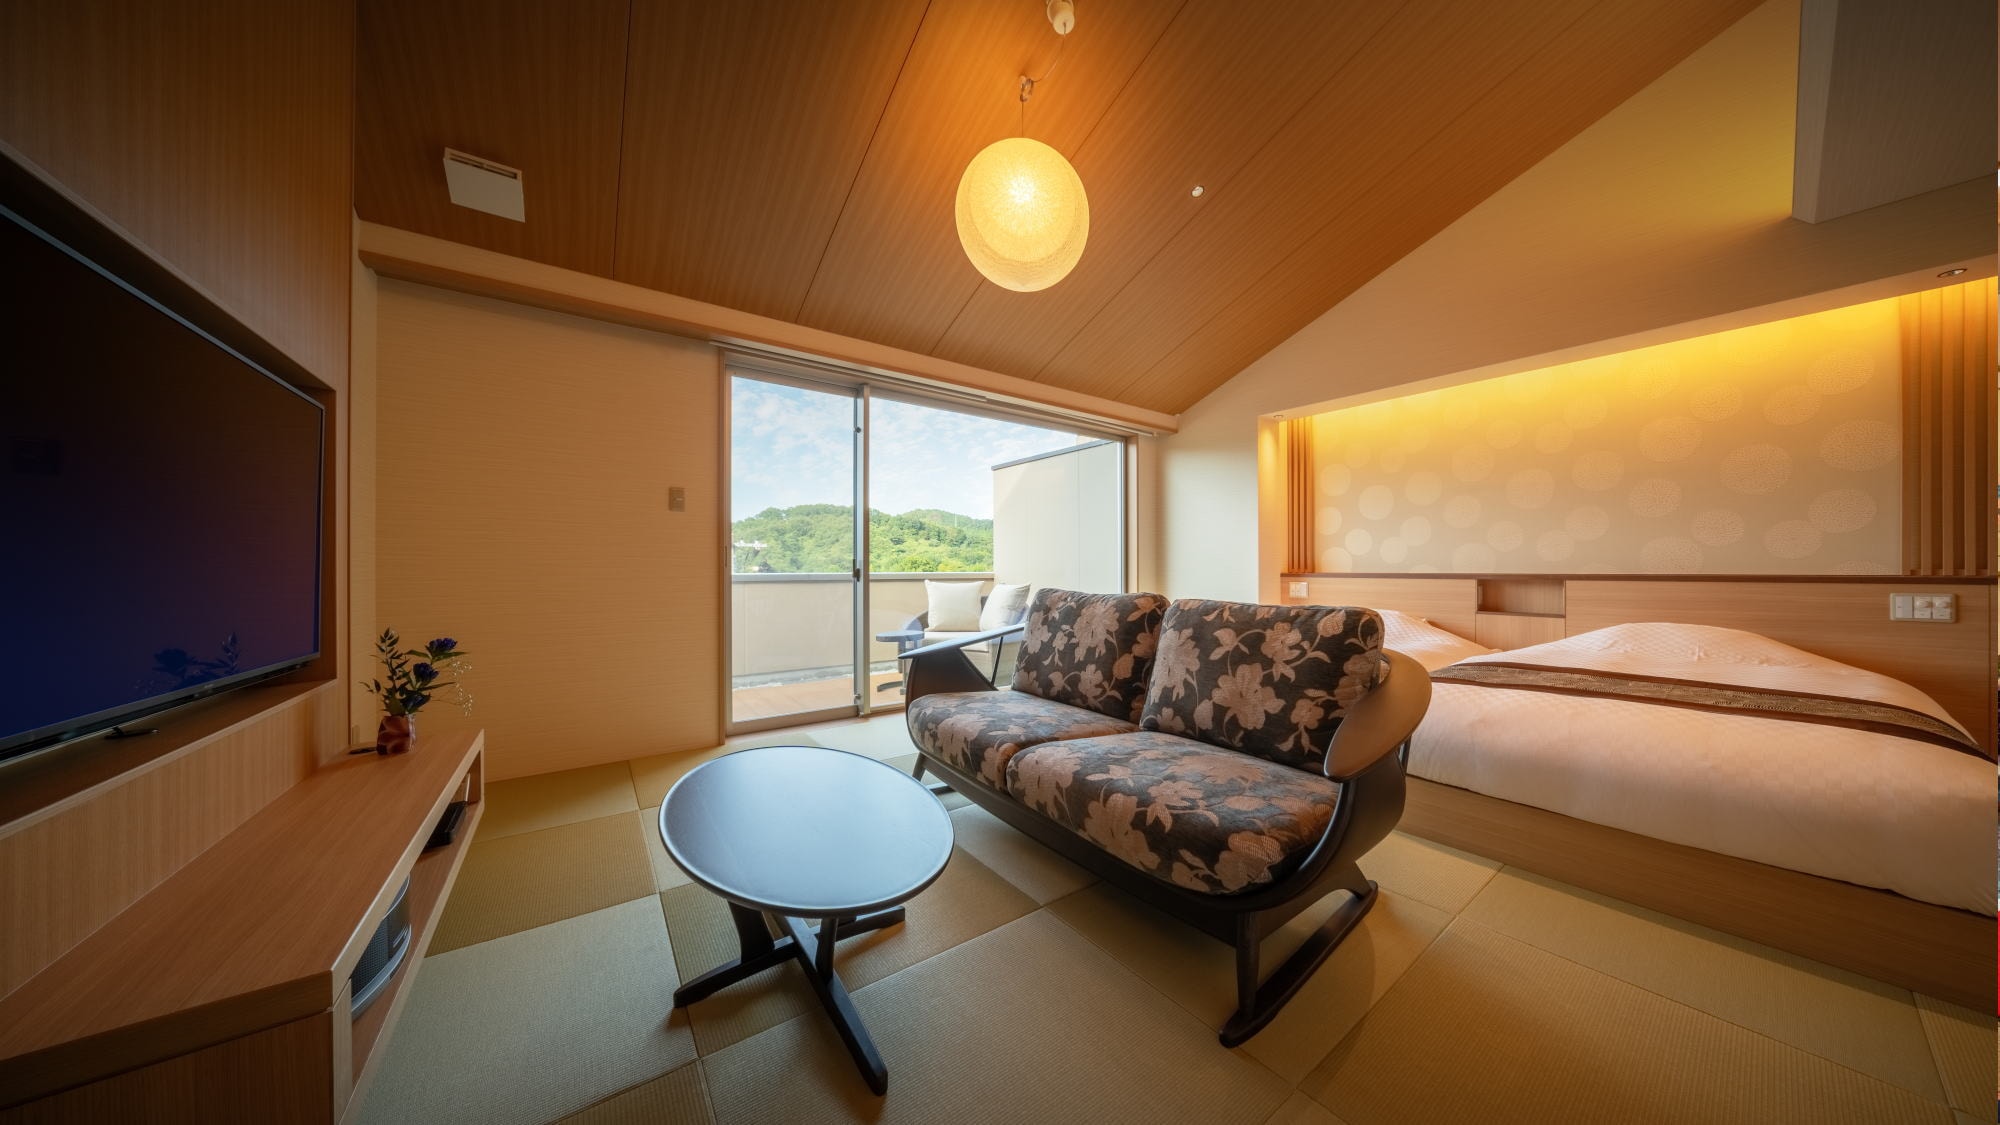 All 5 new guest rooms "Hanayu" with a semi-open-air bath